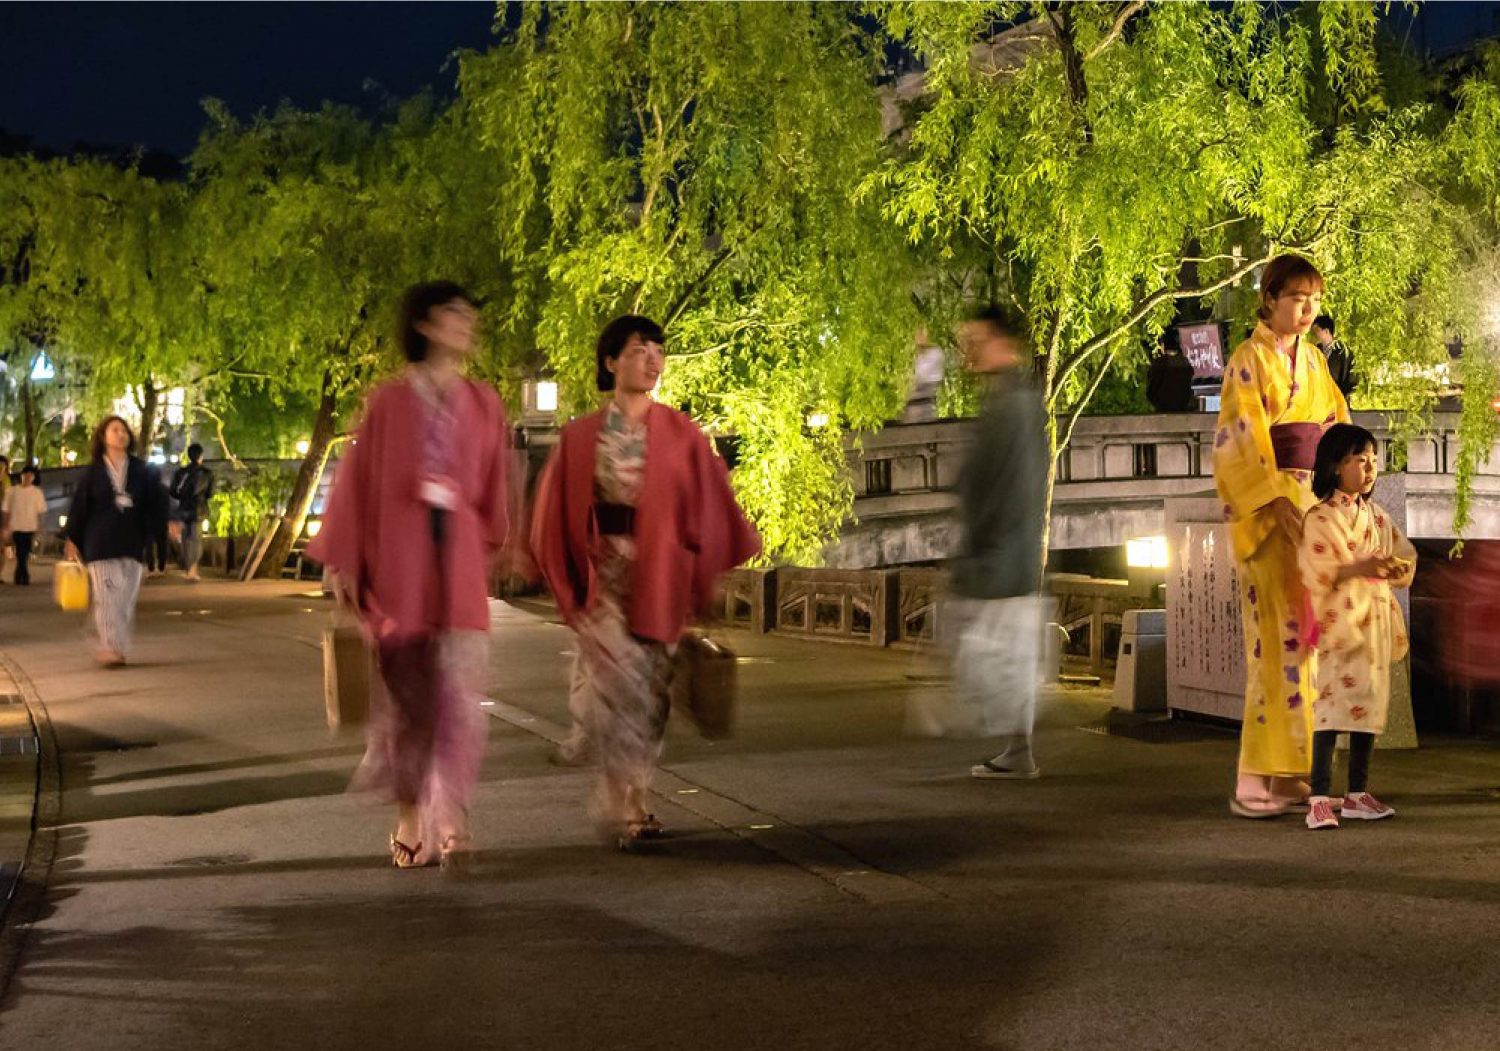 People walking the willow-lined streets of Kinosaki Onsen in their colorful Yukata at night